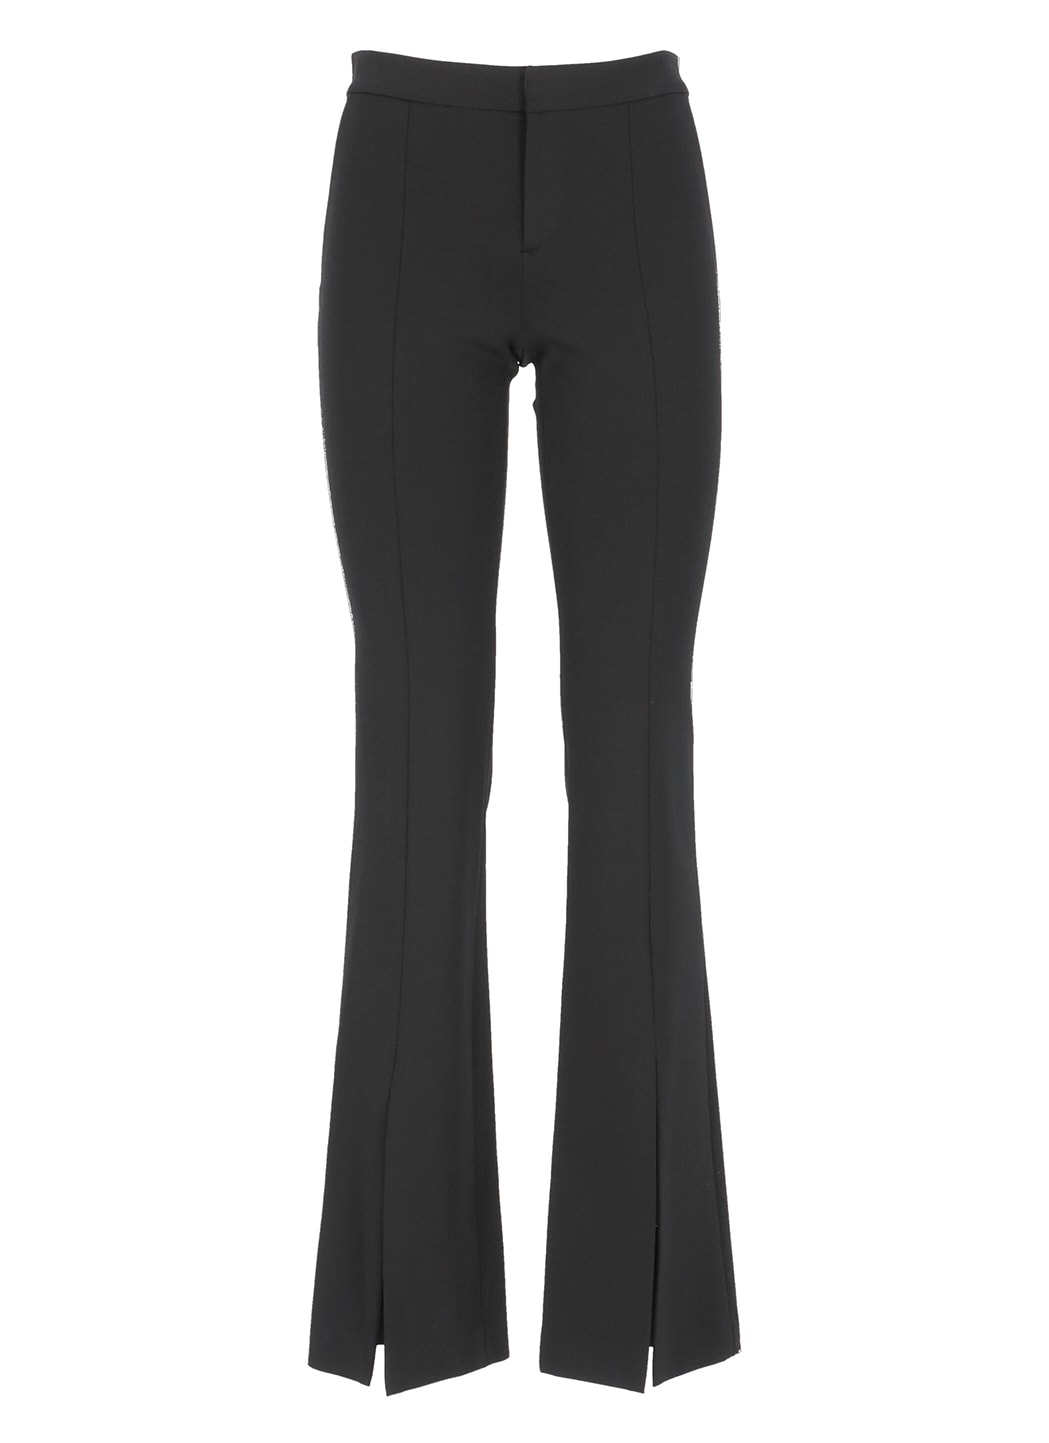 ALICE AND OLIVIA WALKER TROUSERS